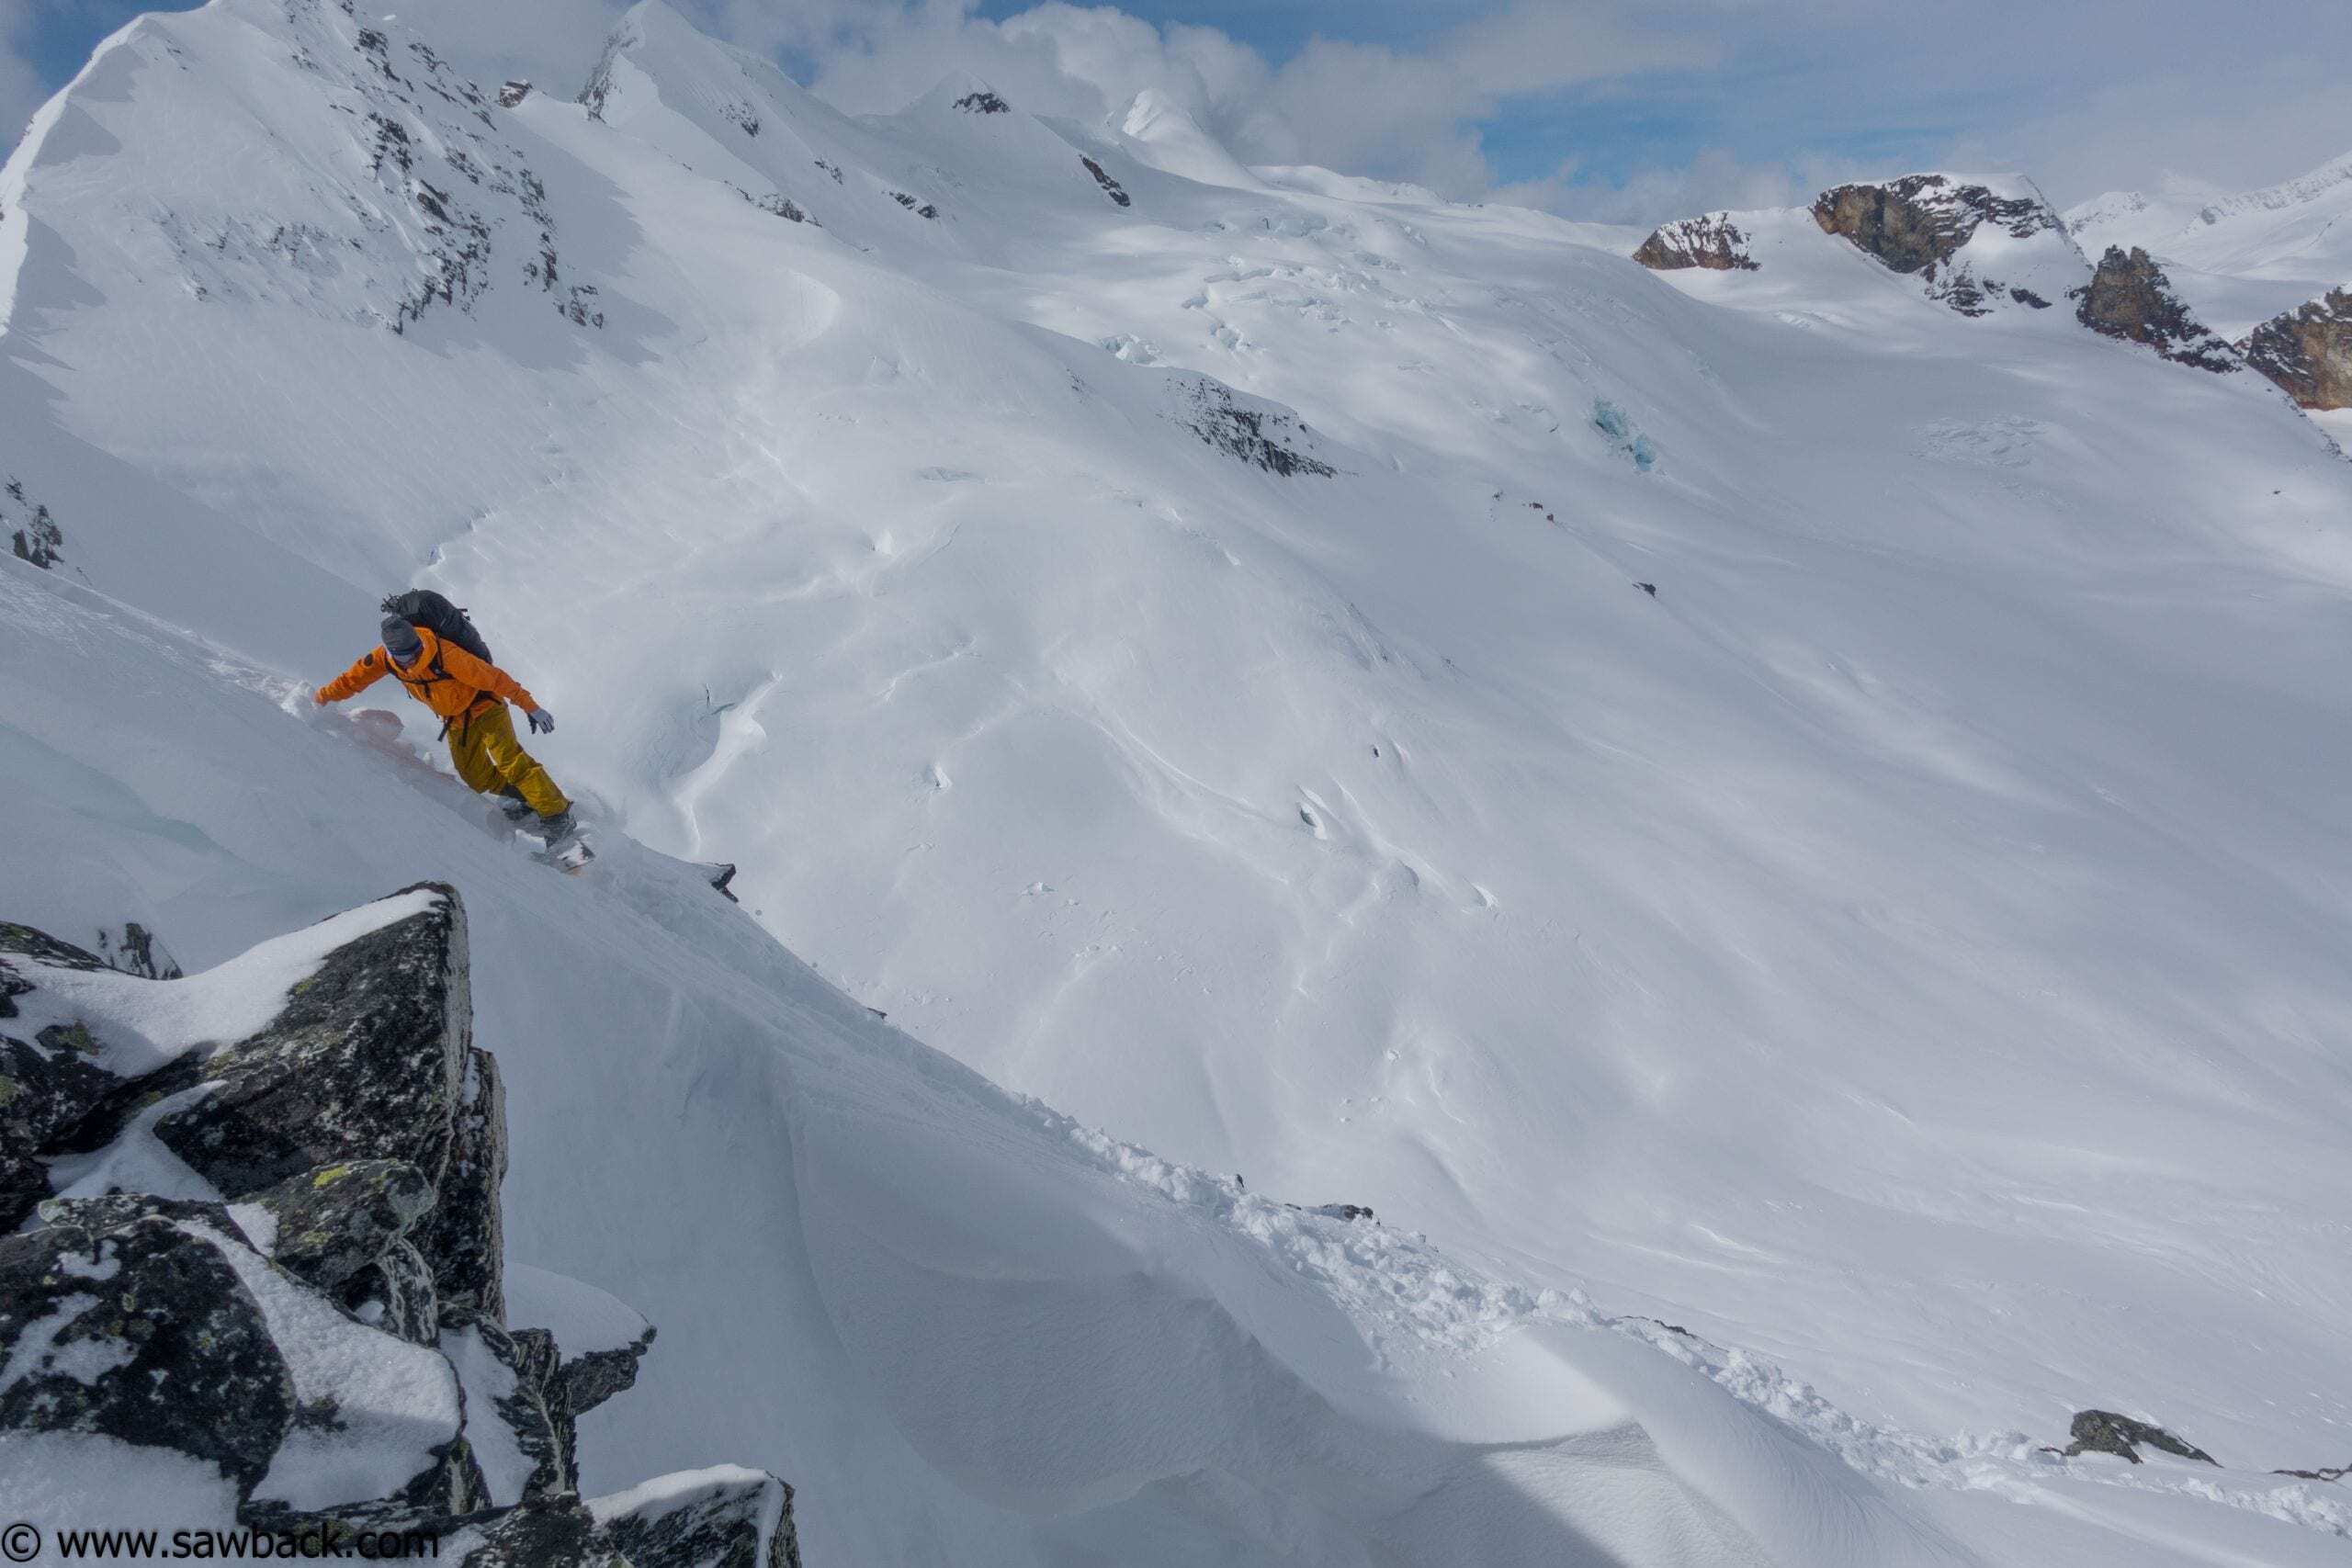 Jeff Wexler dropping into a couloir at the top of Perfect Peak